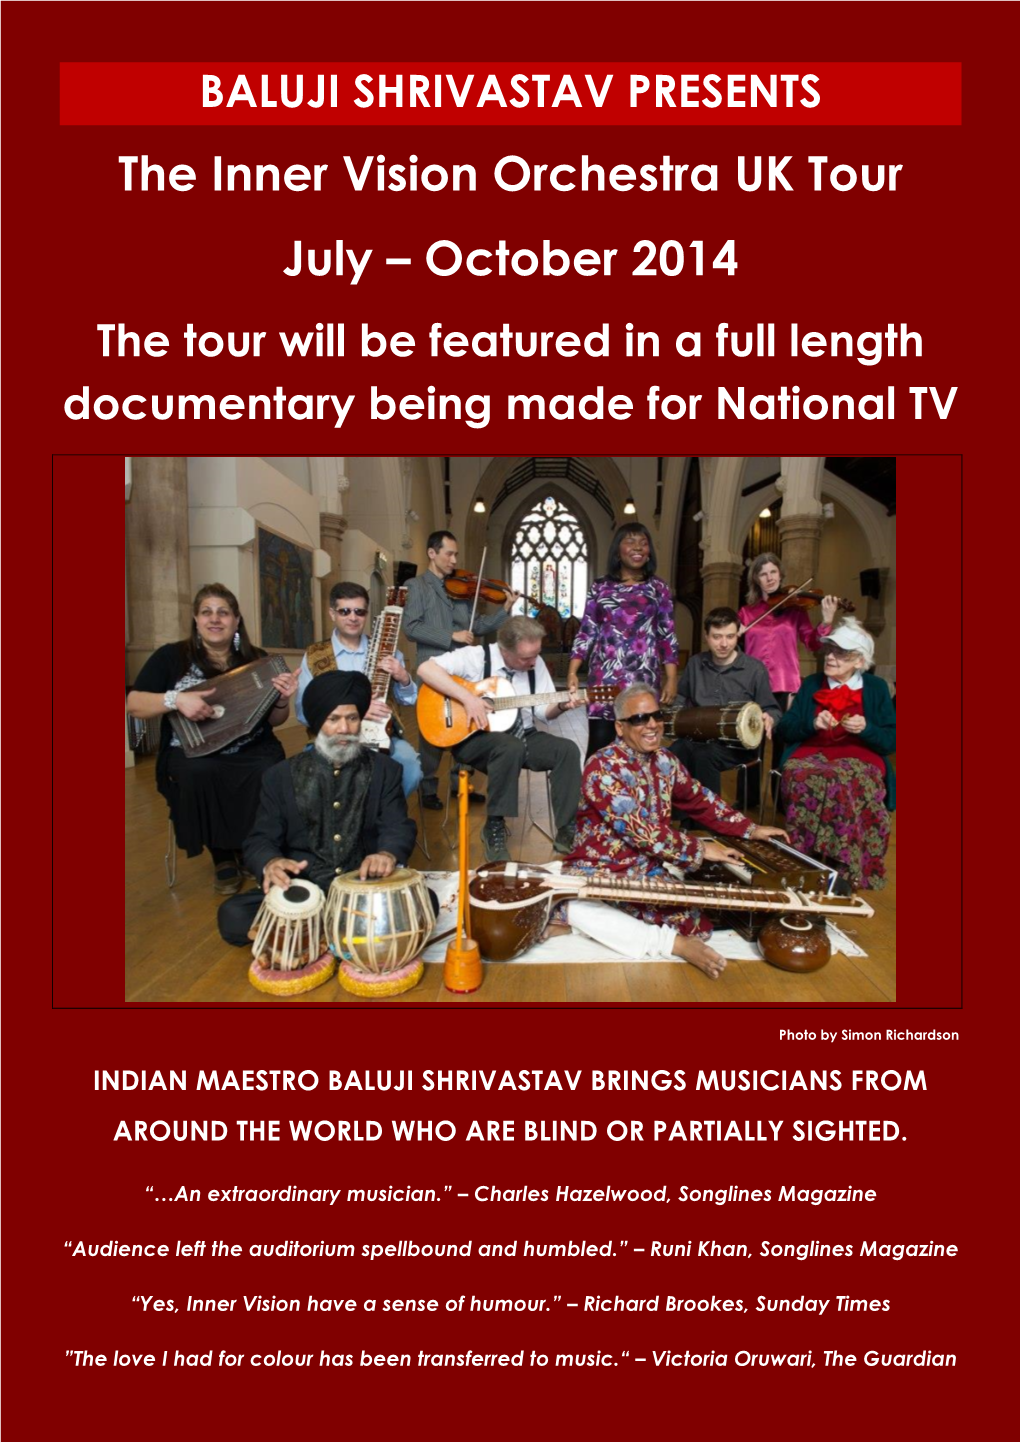 The Inner Vision Orchestra UK Tour July – October 2014 the Tour Will Be Featured in a Full Length Documentary Being Made for National TV